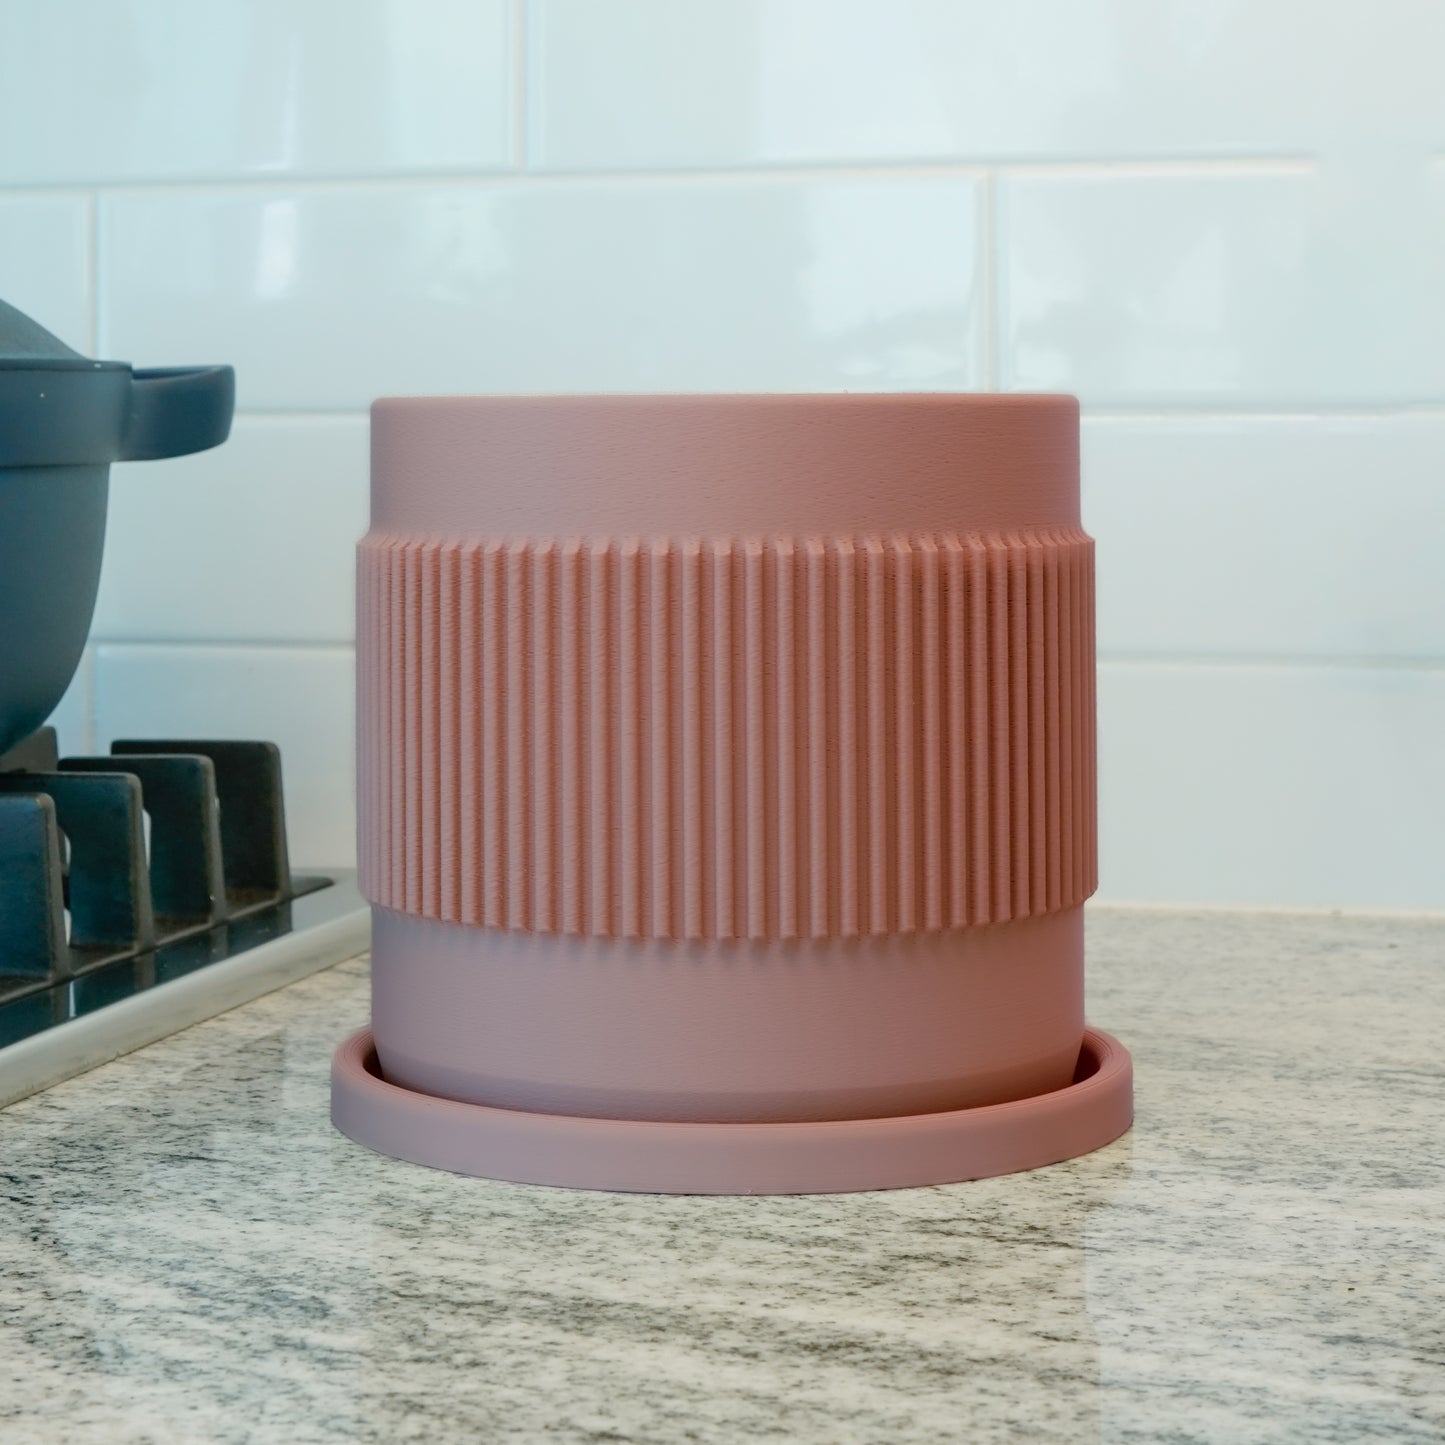 Half Mid-Century Ribbed Planter with Drainage and Saucer, 3D Printed Planter with Unique Modern Design, Lightweight Cottagecore Decor